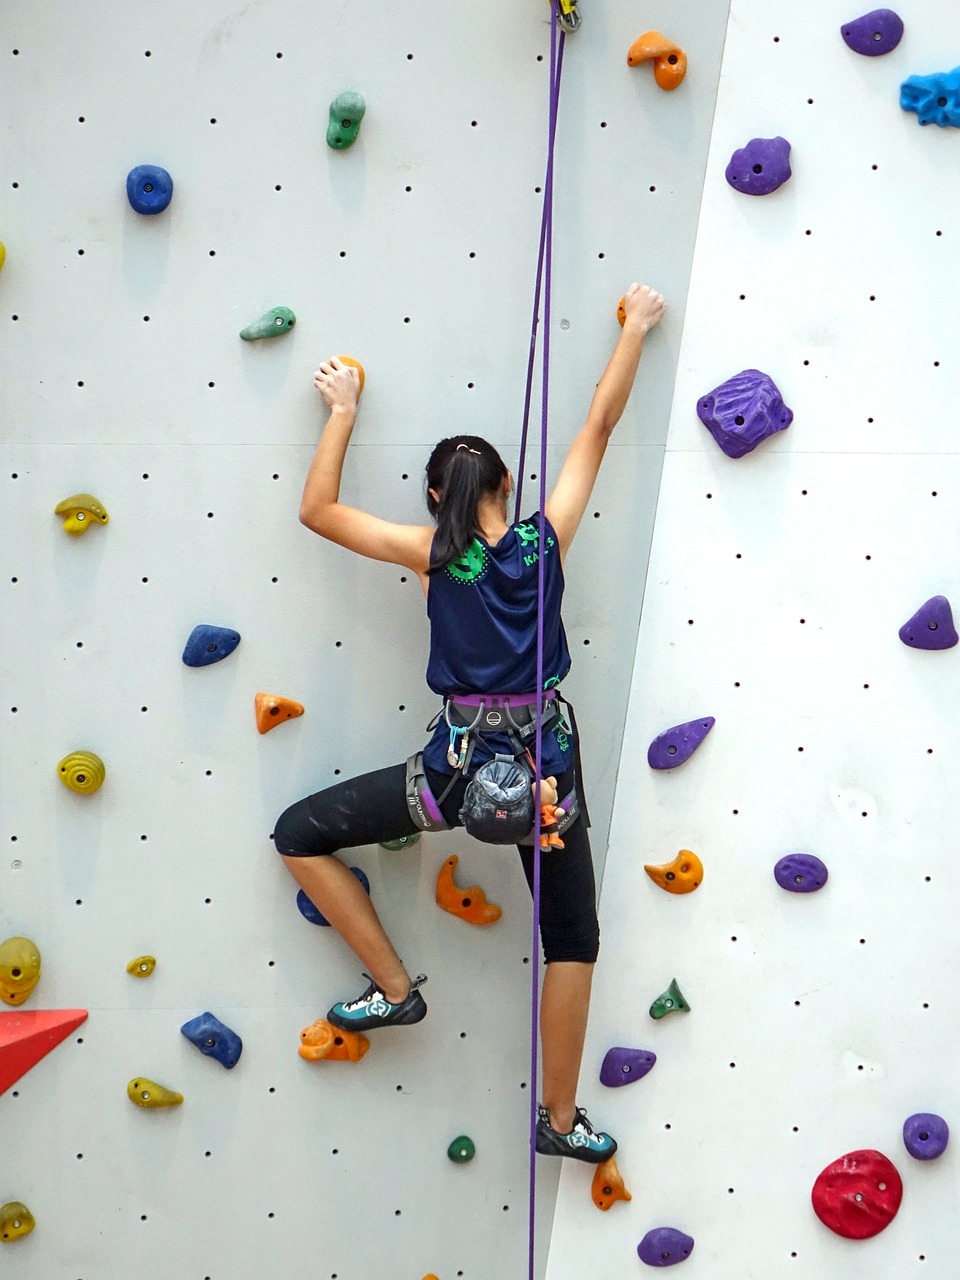 Essential knowledge for your first indoor rock climb